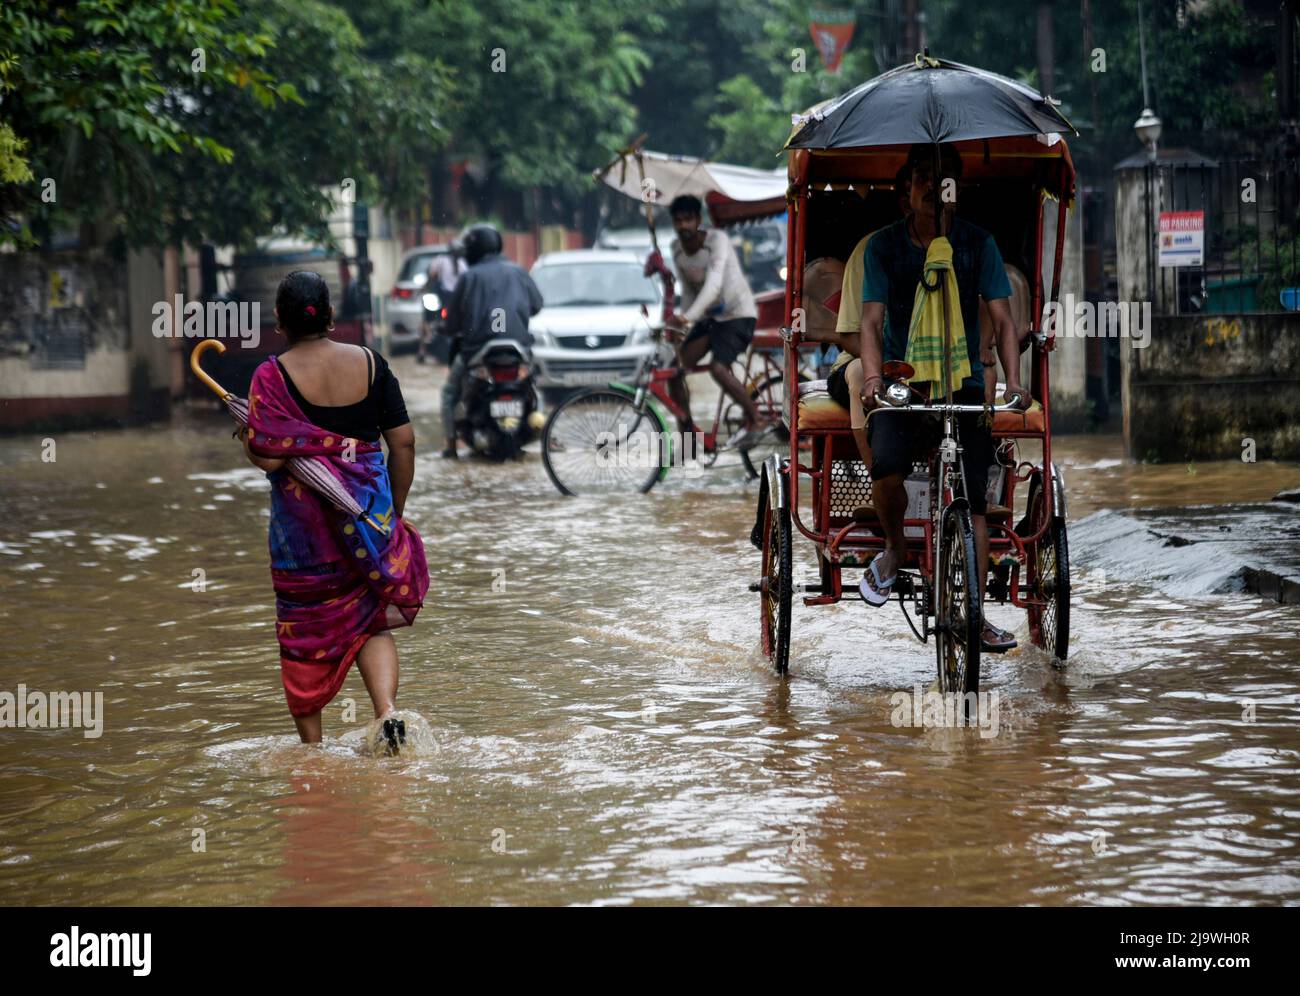 Guwahati, Assam, India. 25th May, 2022. Commuters wades across a flooded street after heavy rains, in Guwahati, Assam, India on 25 May 2022. Waterlogging is a common scene in Guwahati city due to poor drainage system. Credit: David Talukdar/Alamy Live News Stock Photo